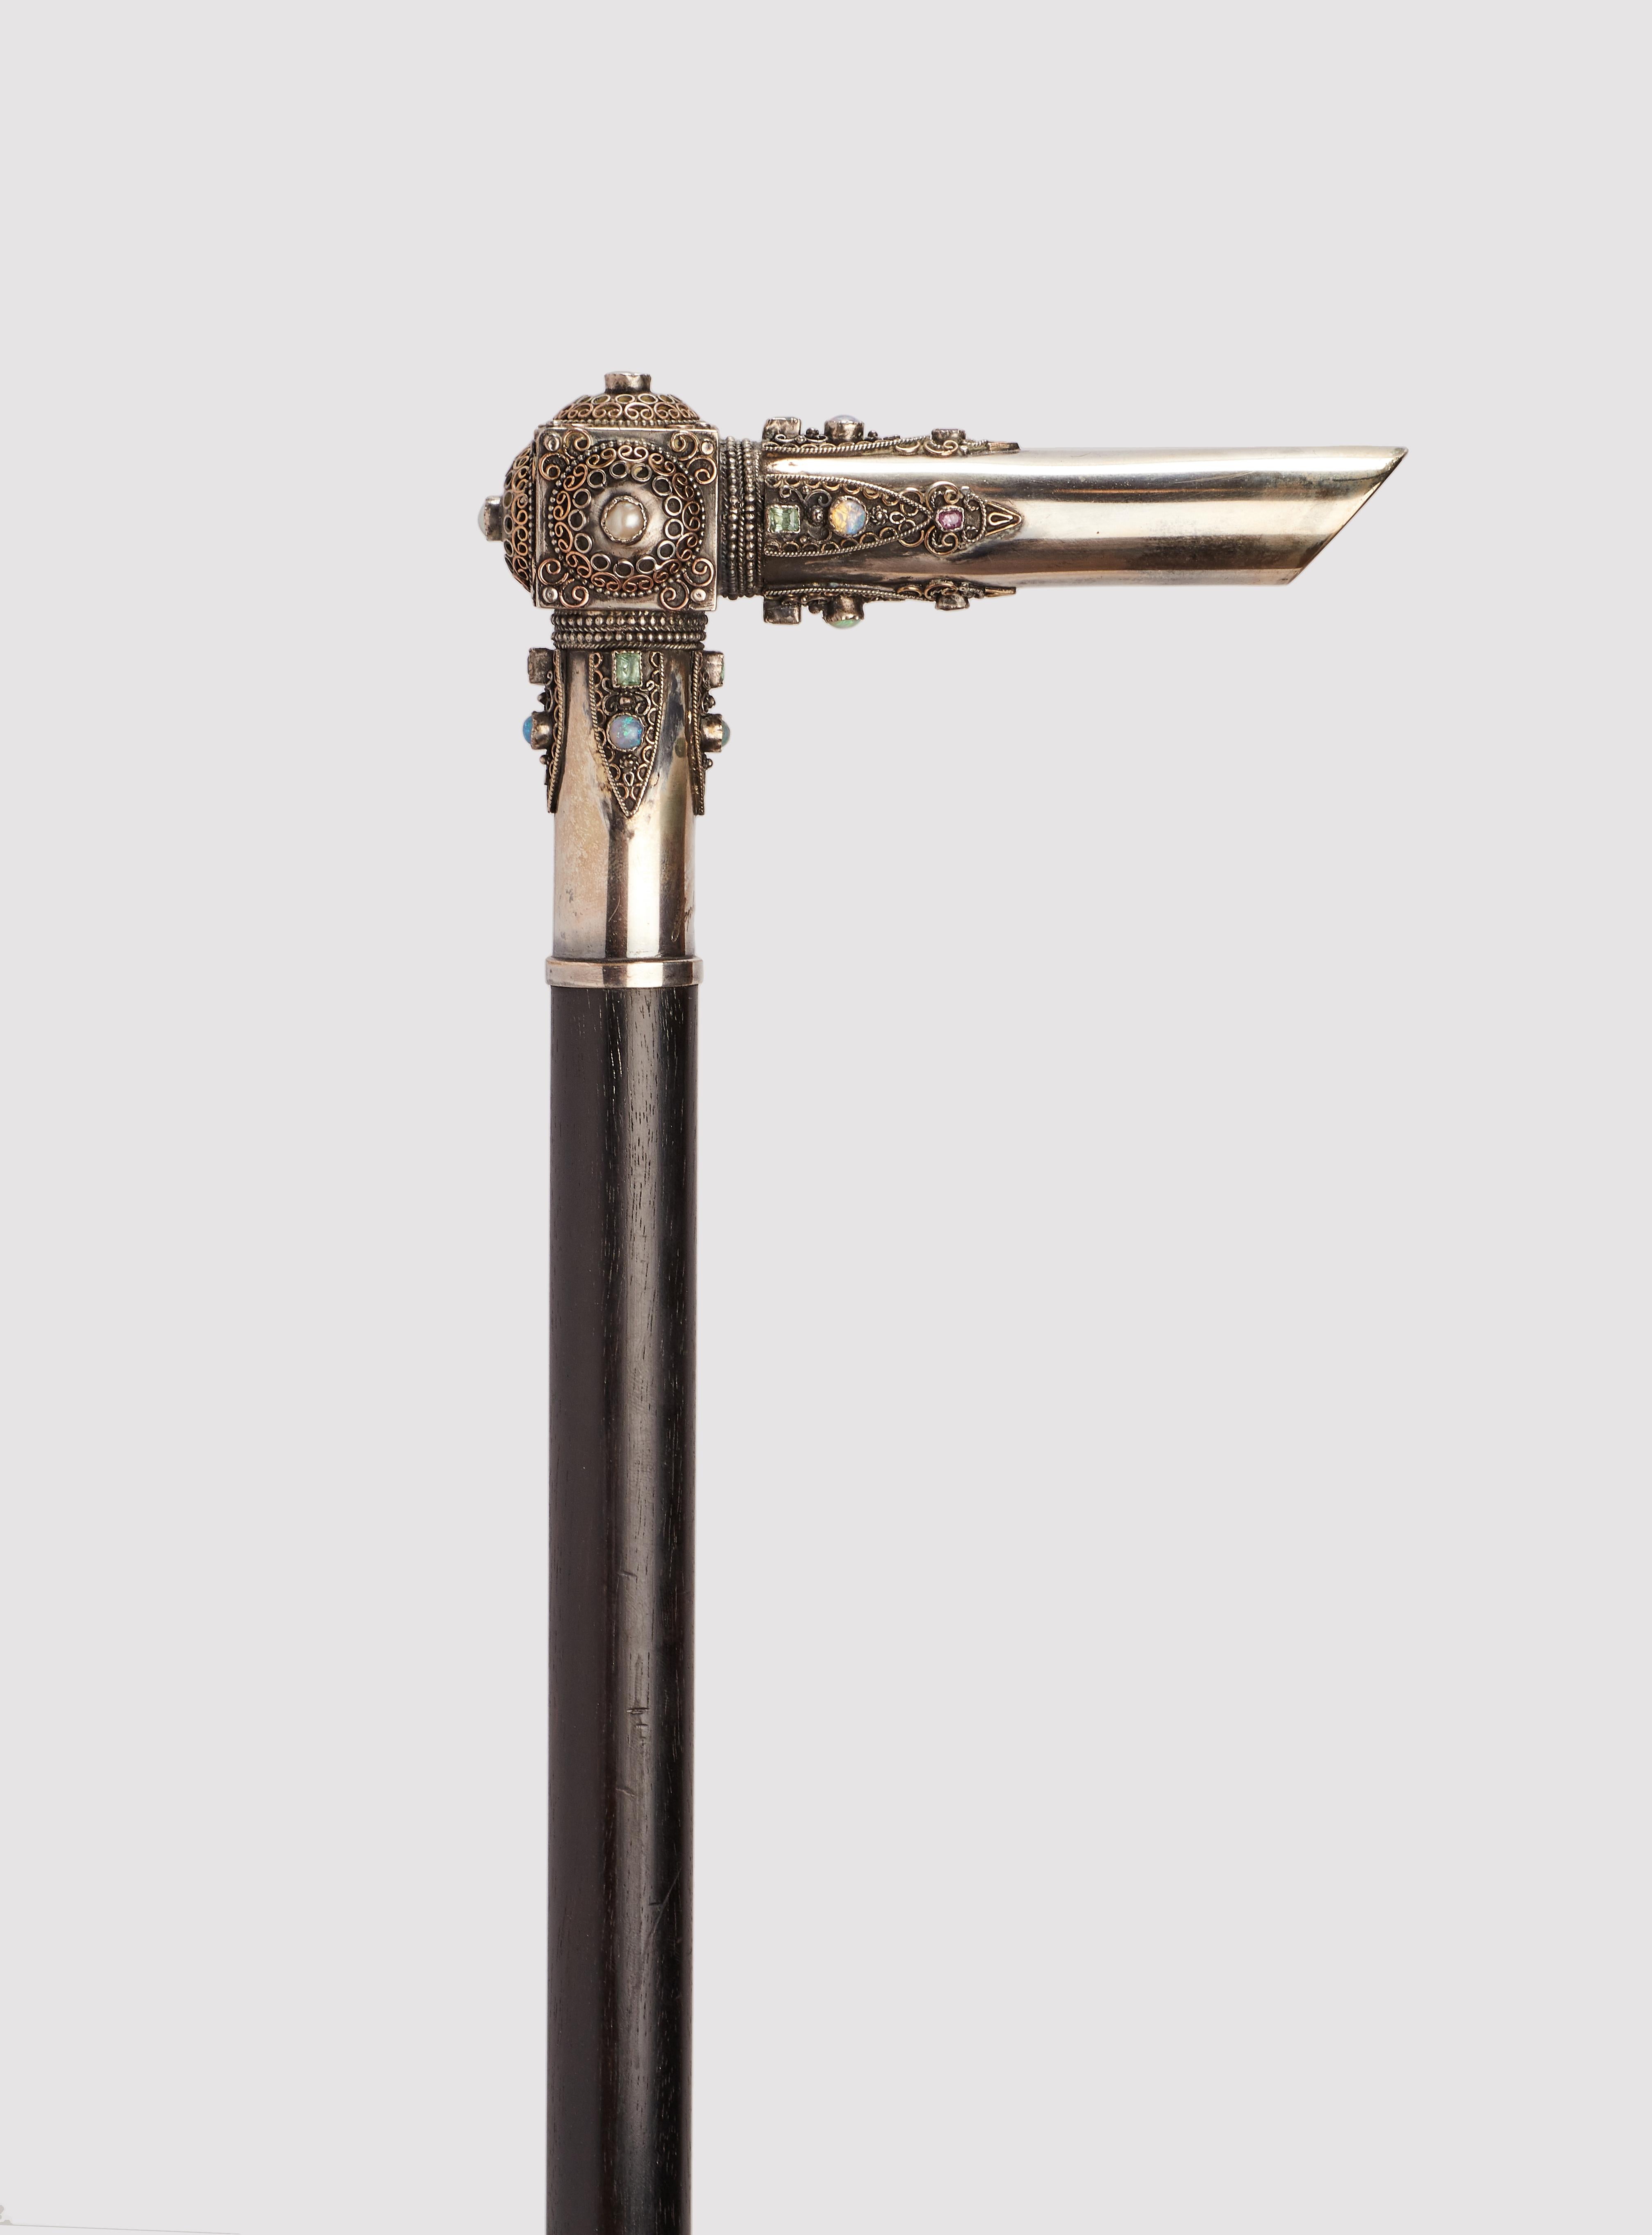 Walking stick: jewel  cane L shape handle made out of silver with 18K gold filigree and precious stones: pearls, opals, rubis, tourmalines. Ebony wood shaft. Metal ferrule. Sophie Sander-Noske, France 1900-1910.